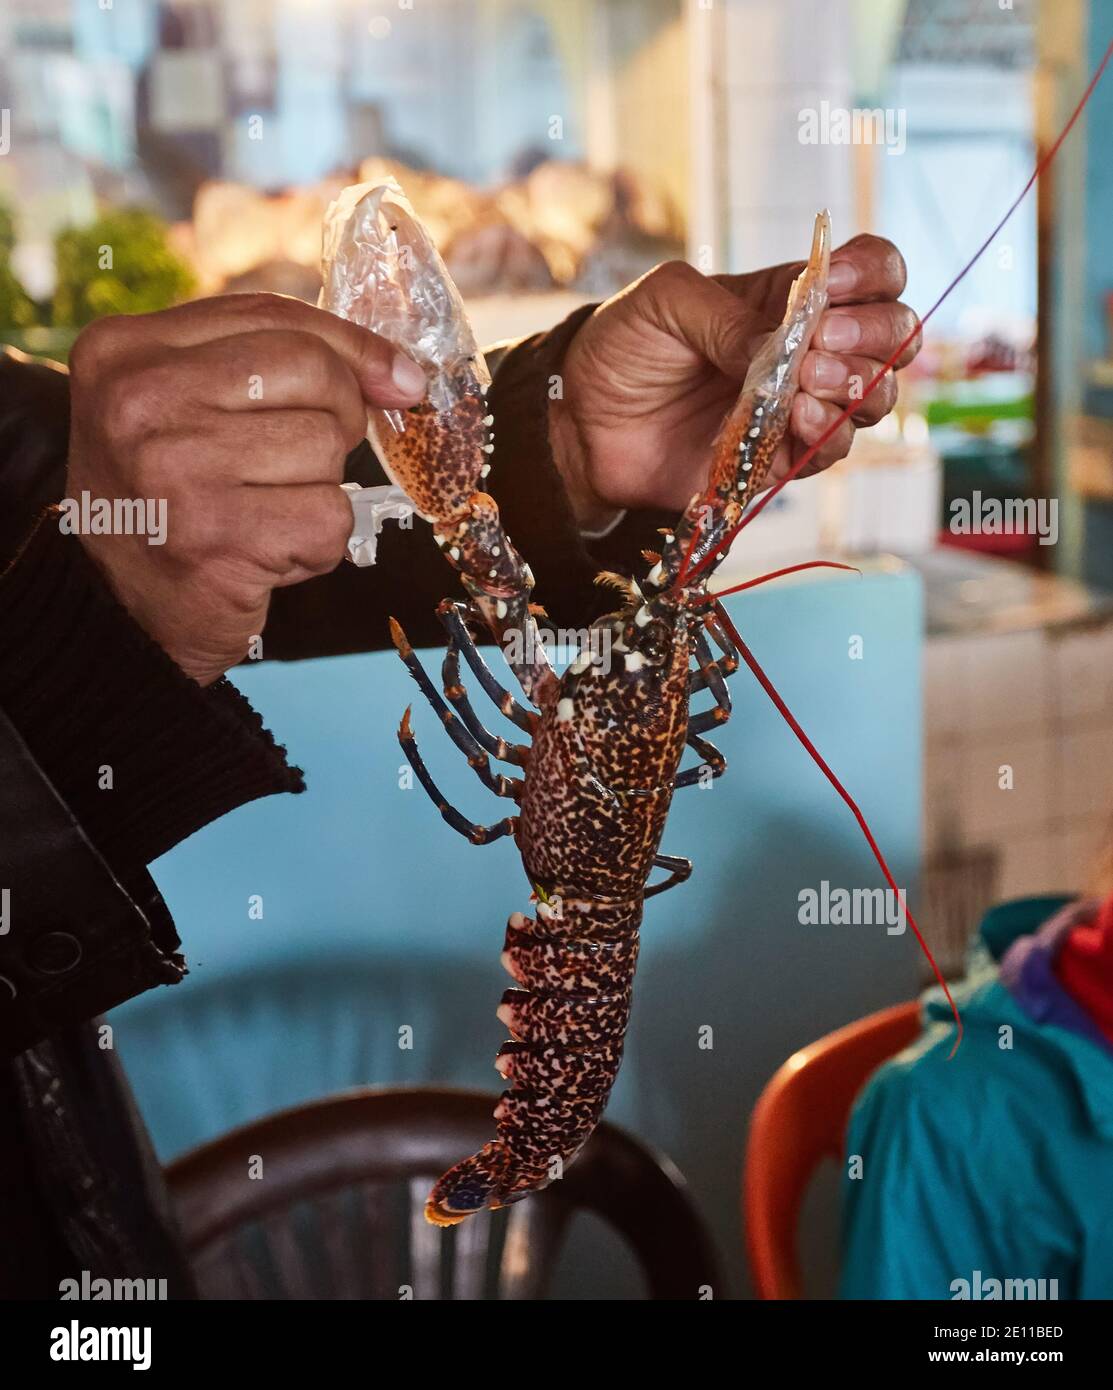 Real fish market and fresh fish, seafood from Atlantic ocean in Morocco  Stock Photo - Alamy